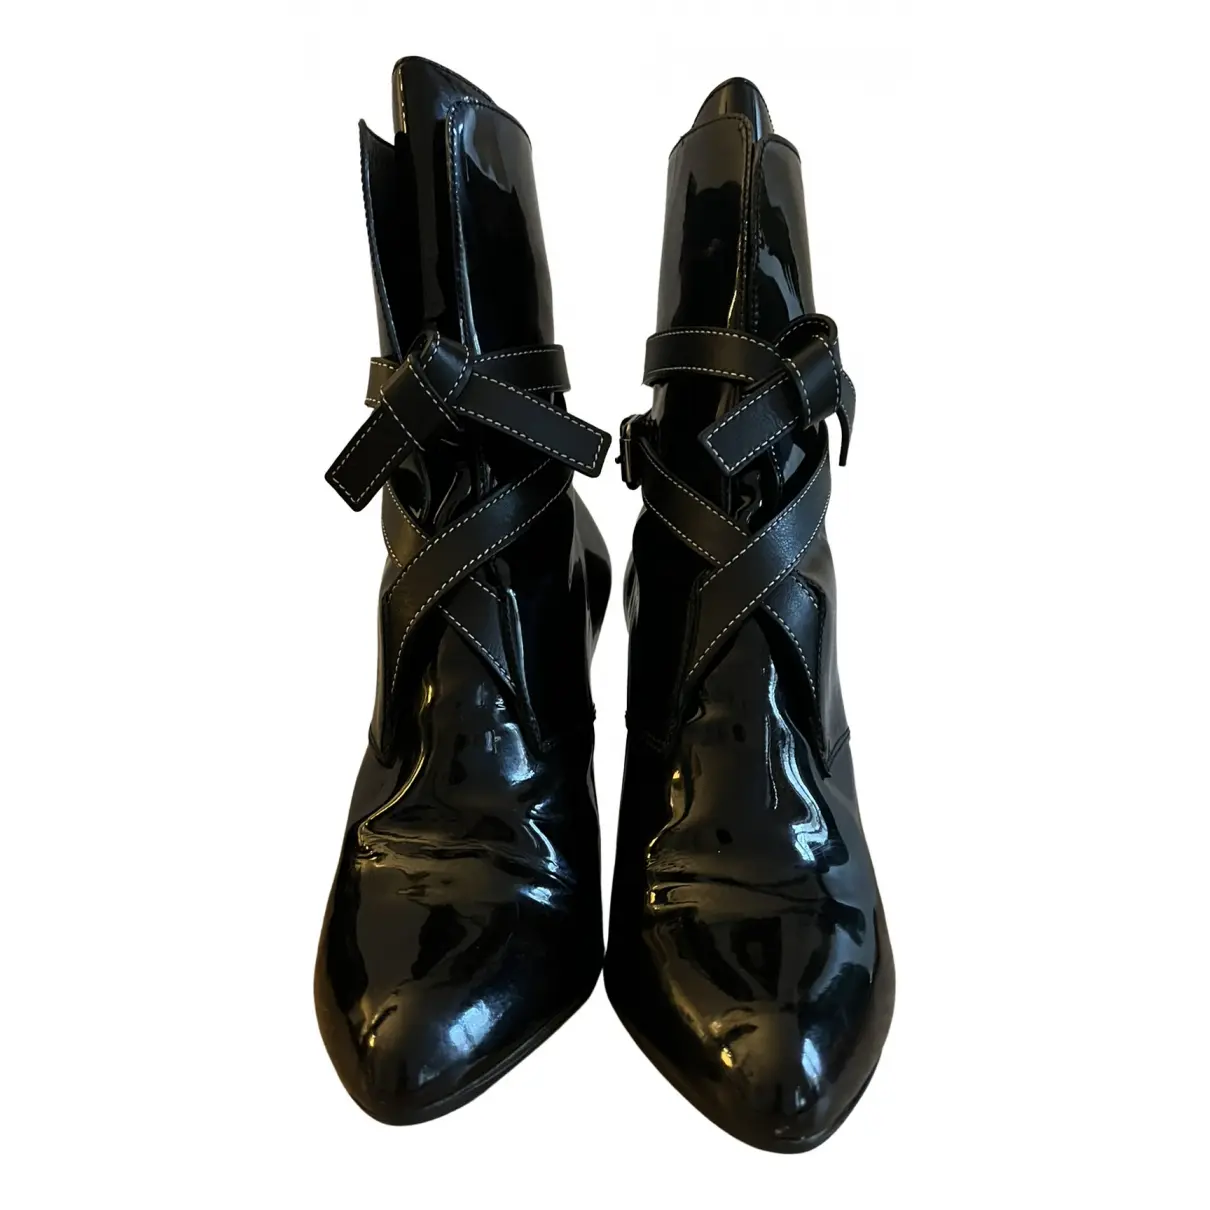 Patent leather buckled boots Louis Vuitton